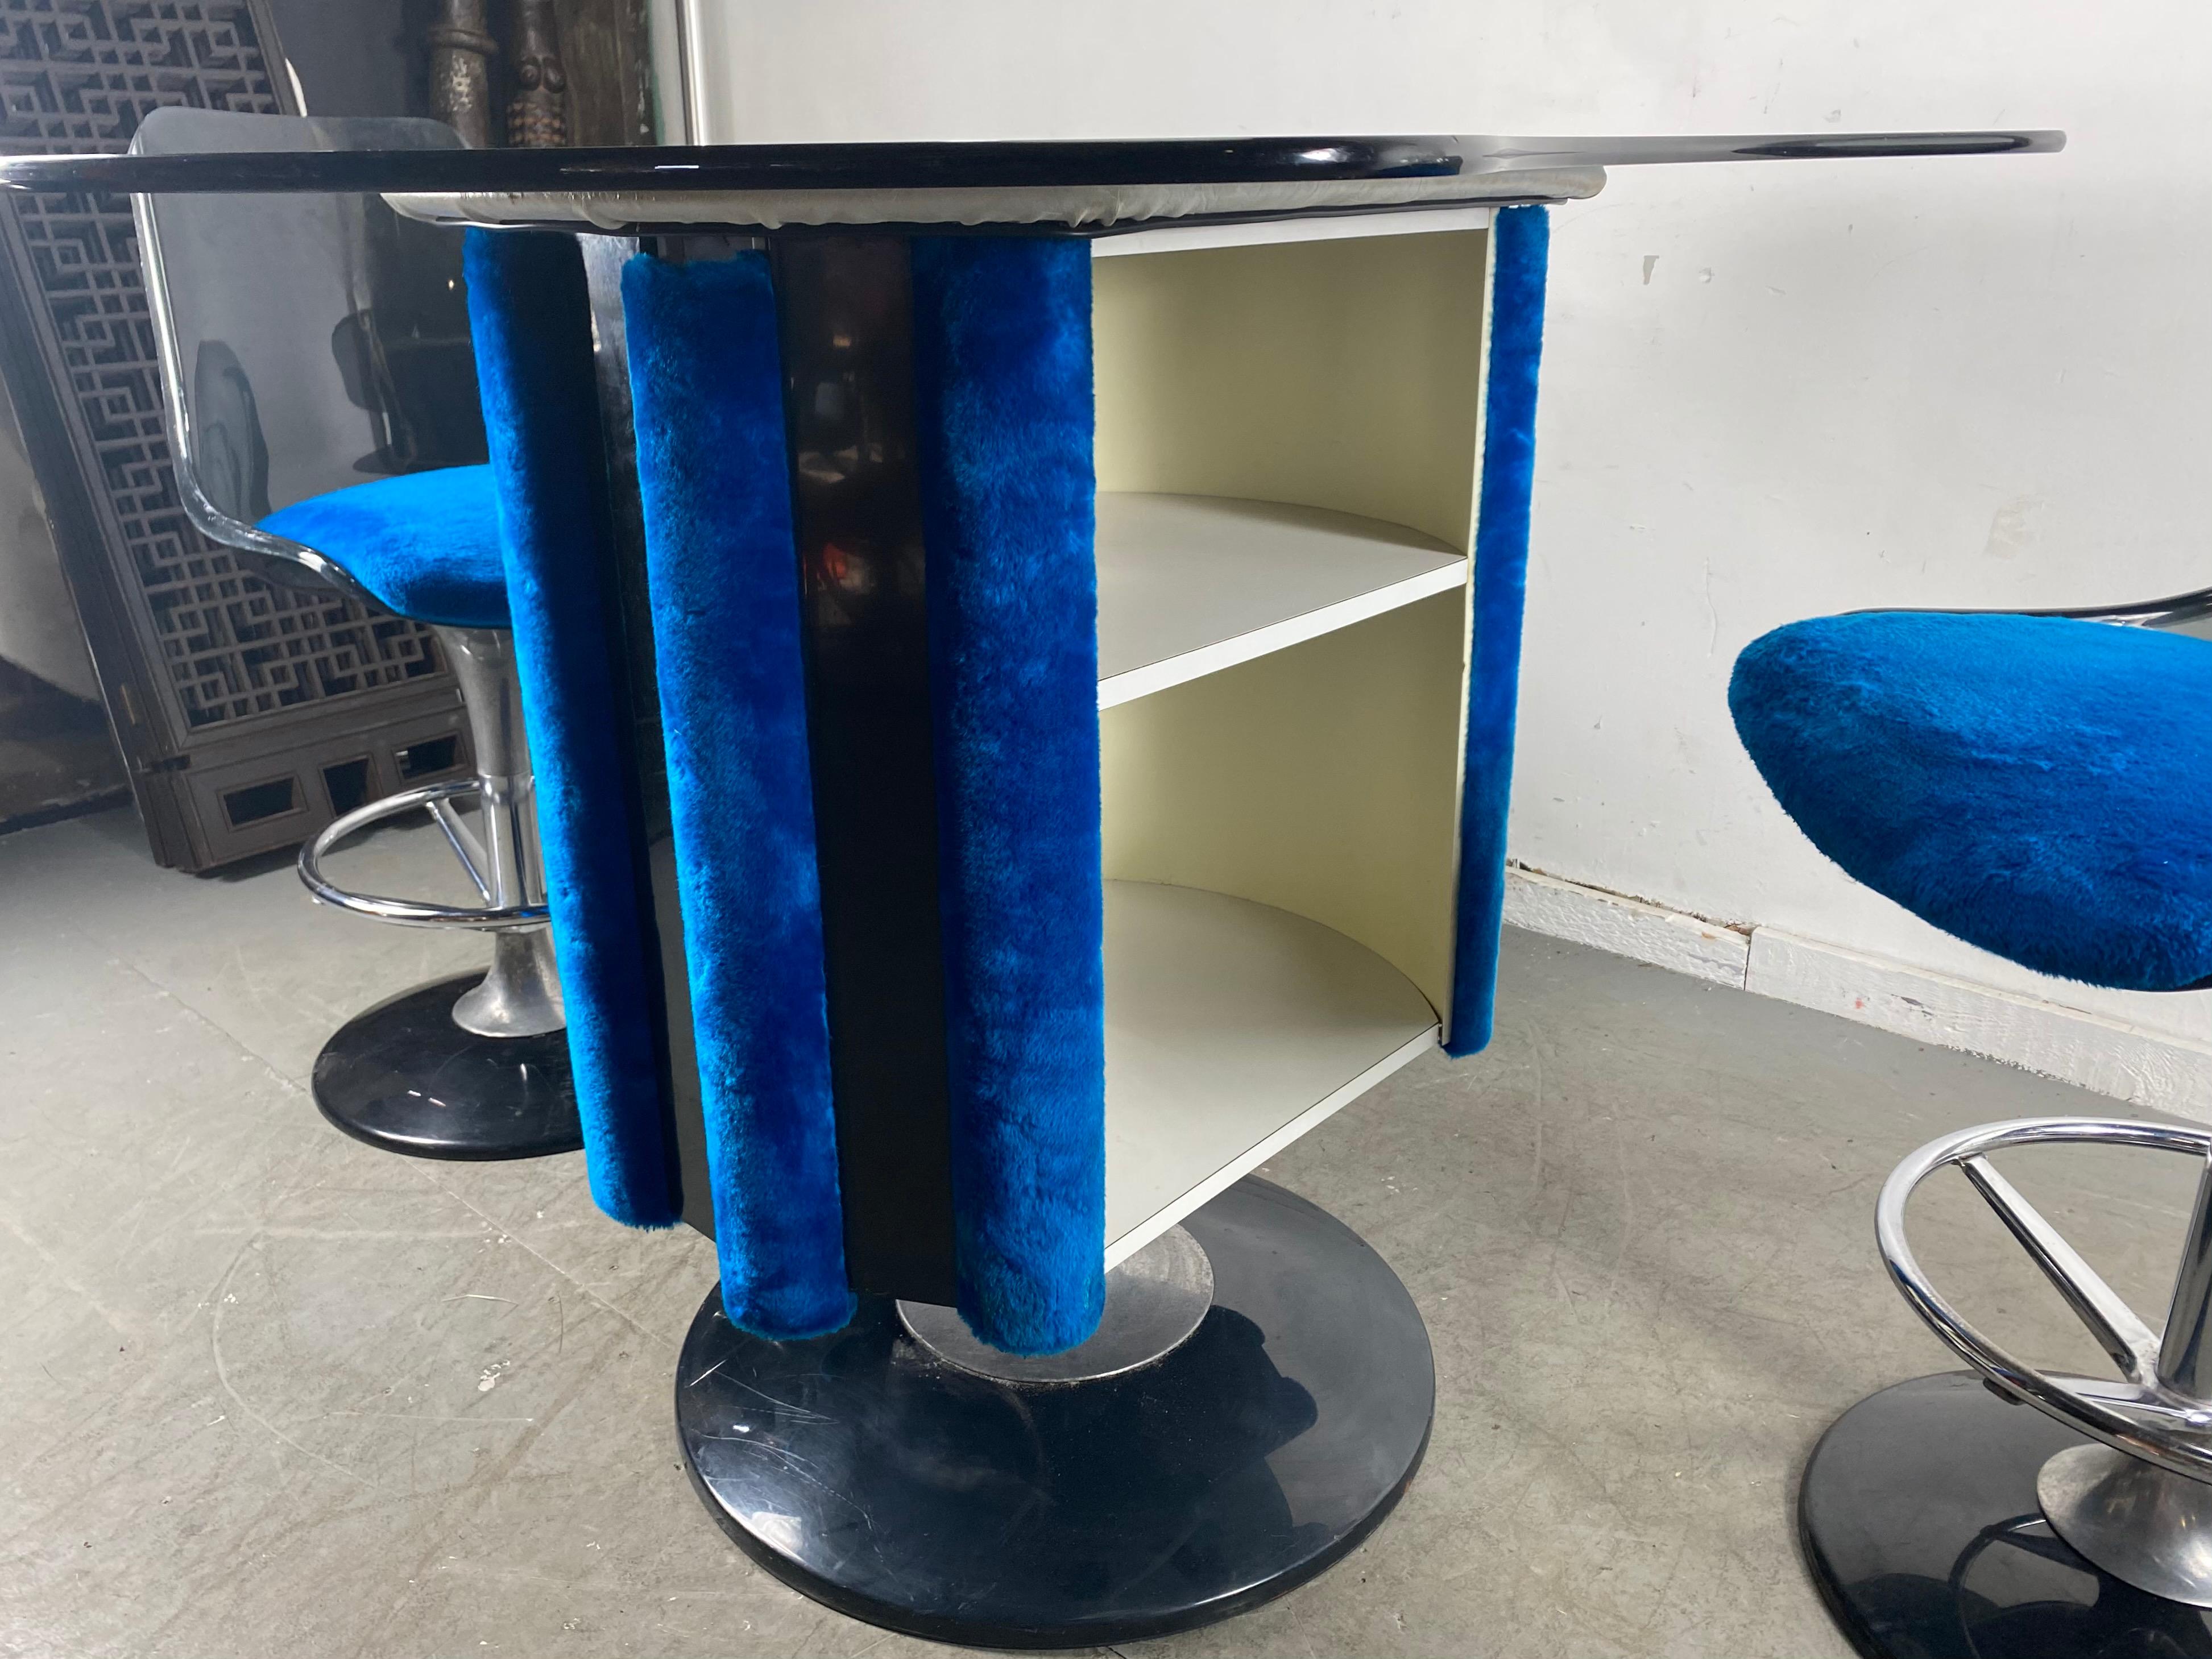 1970s Space Age Three-Piece Pedestal Dry Bar with Two Stools by Chrome Craft 3